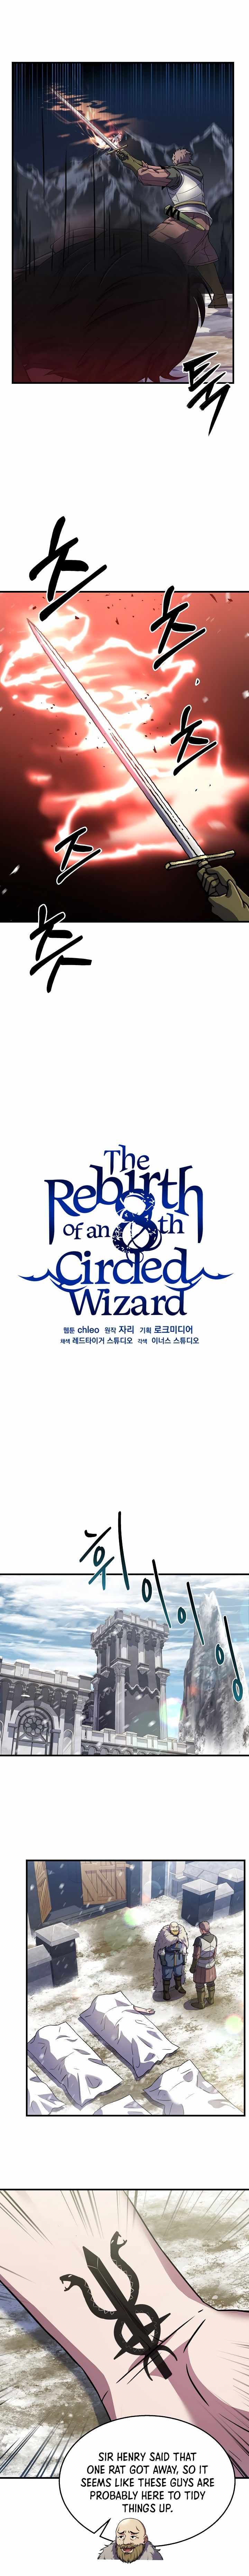 the_rebirth_of_an_8th_circled_mage_71_15